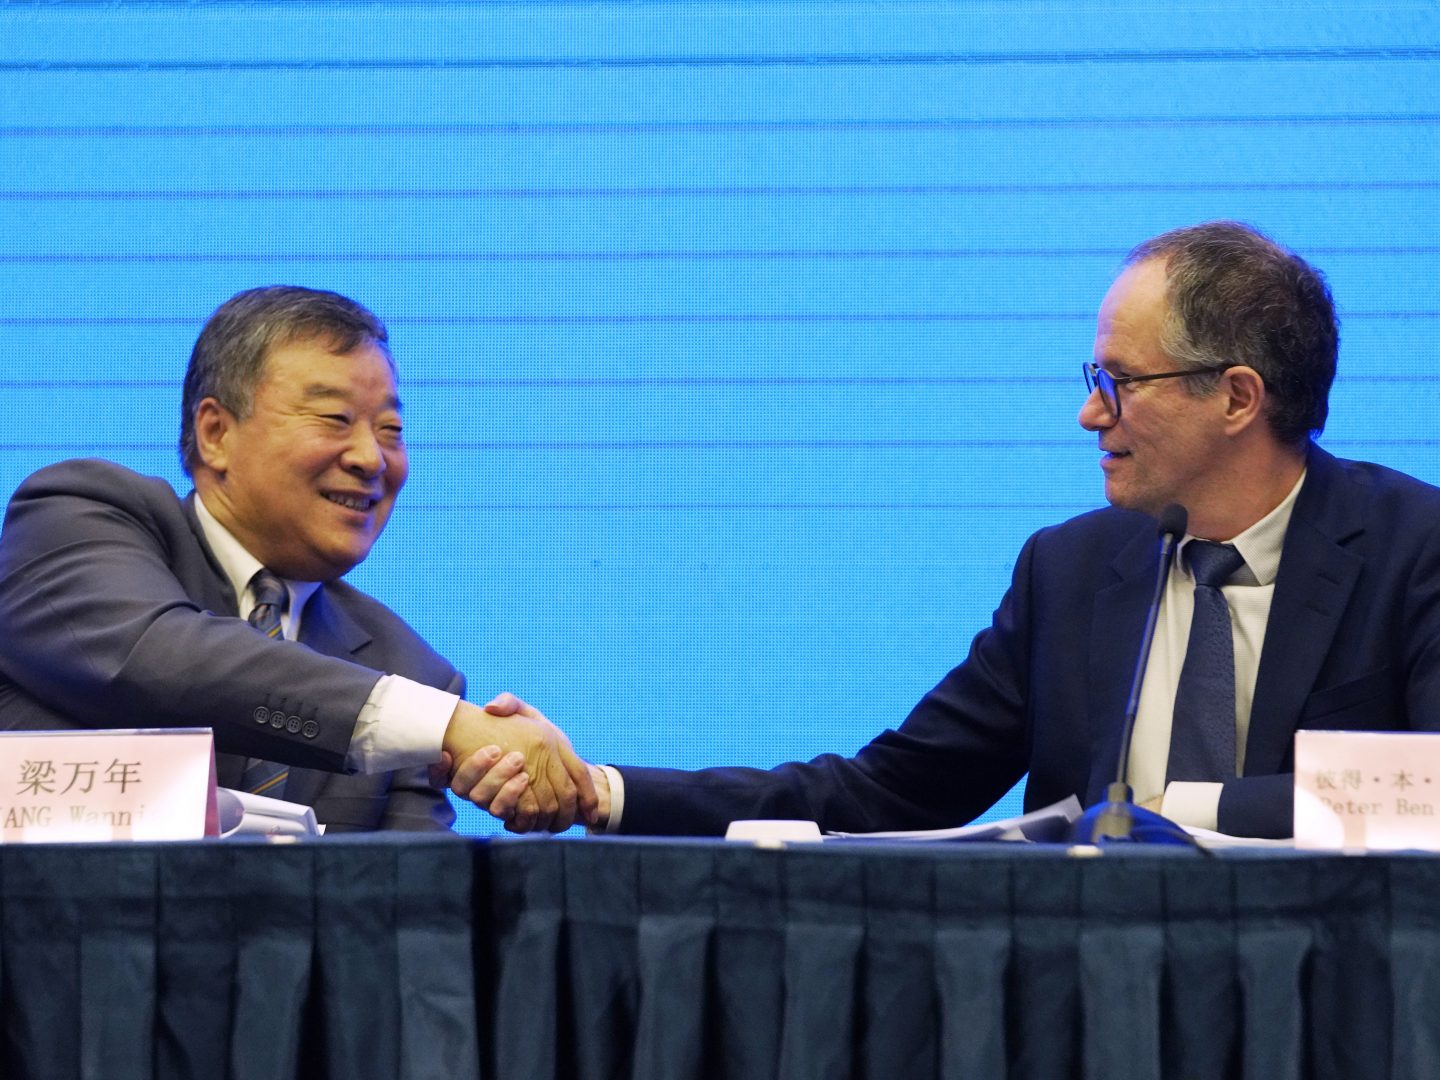 Peter Ben Embarek, of the World Health Organization team, right, shakes hands with his Chinese counterpart Liang Wannian after a WHO-China Joint Study Press Conference held at the end of the WHO mission in Wuhan, China, Tuesday, Feb. 9, 2021. 